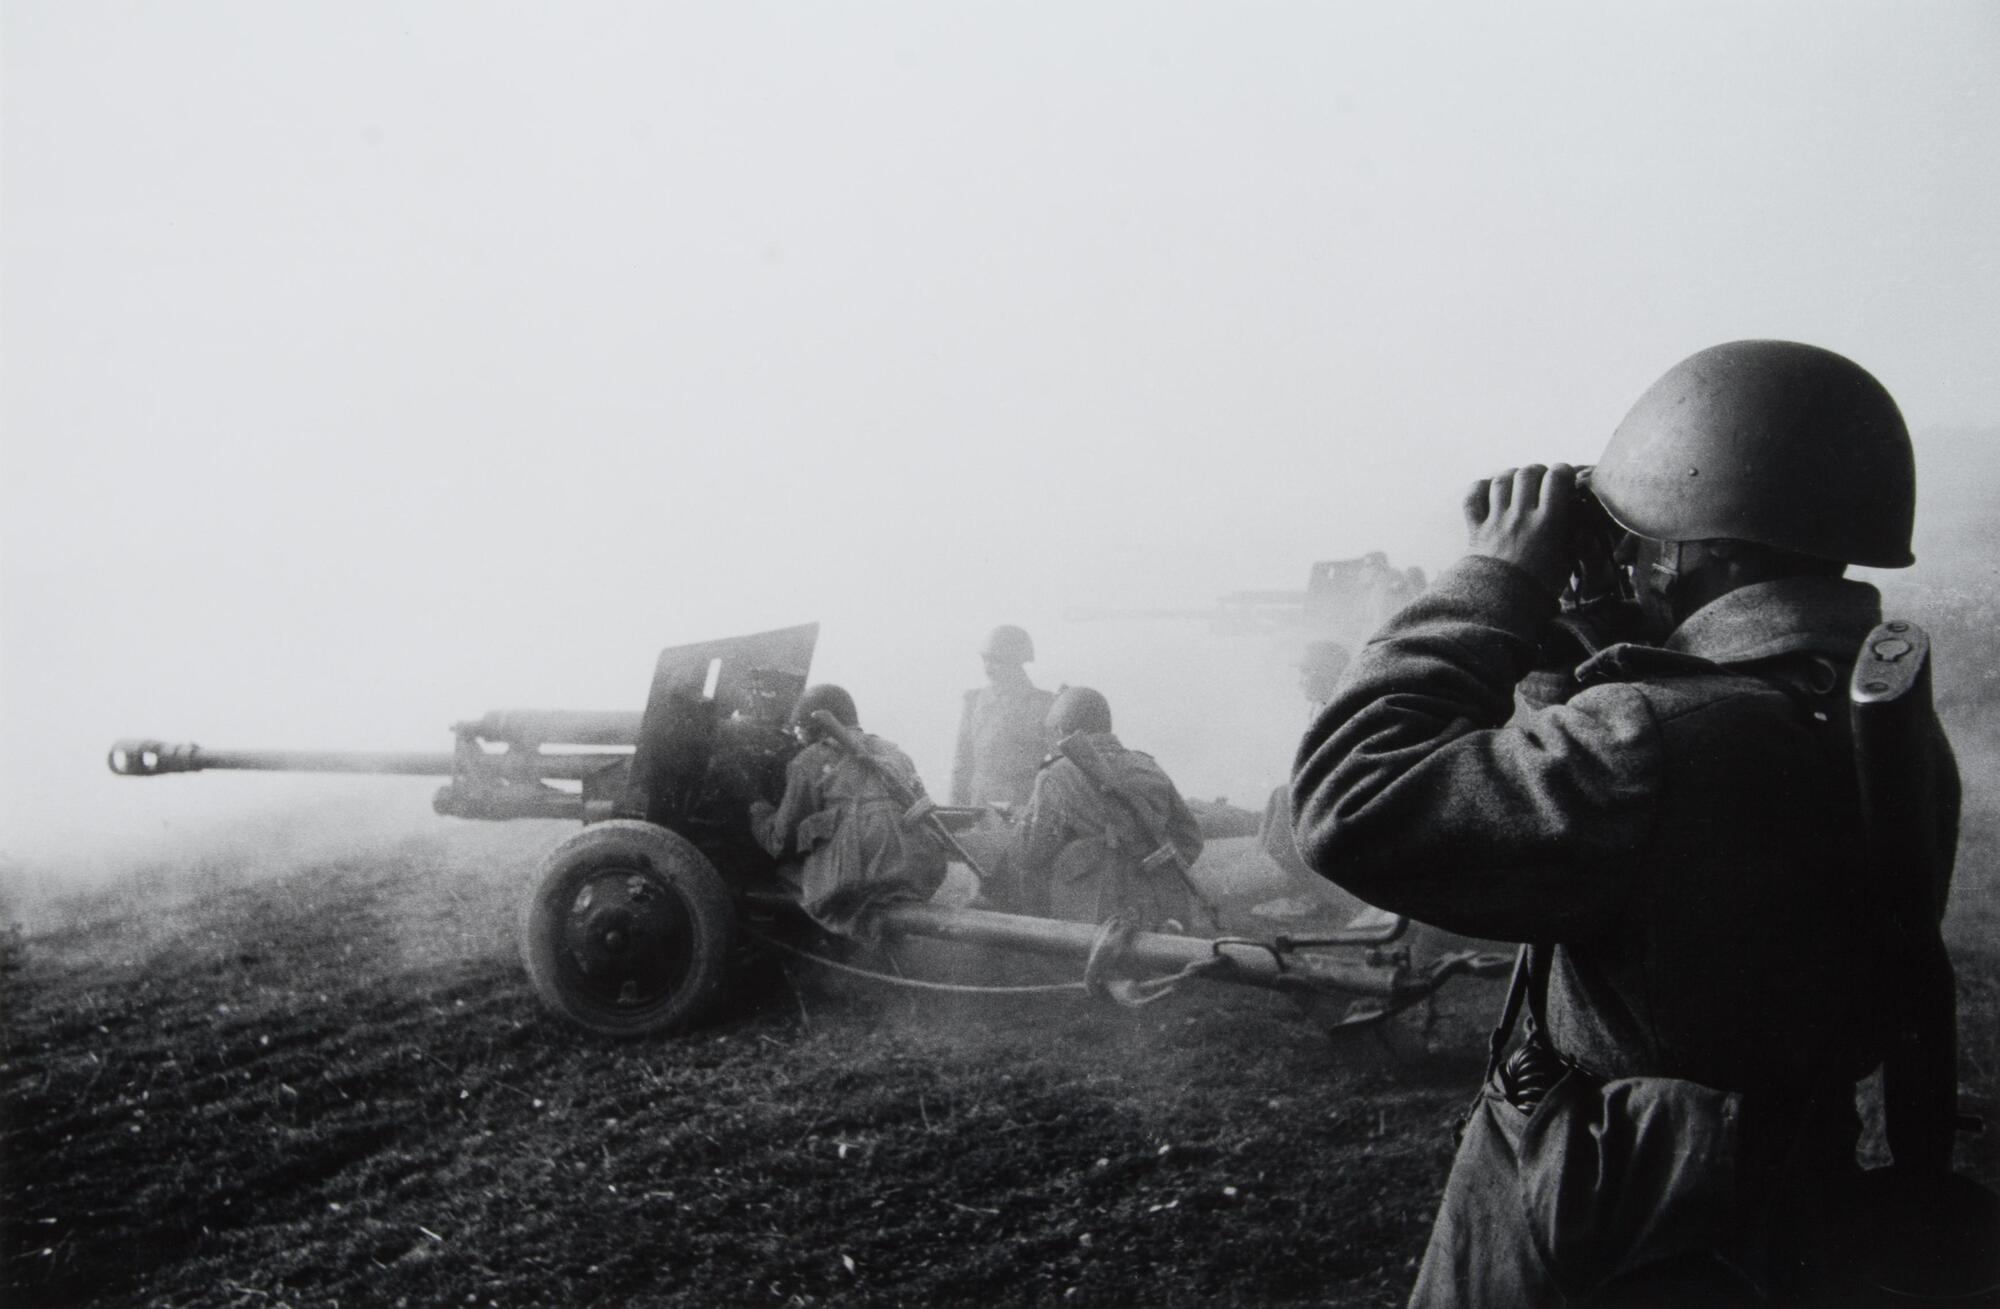 In the lower-right foreground, a soldier with a round helmet peers through binoculars. In the middle ground, other soldiers man an anti-tank gun while fog and/or smoke fills the upper register of the photograph.